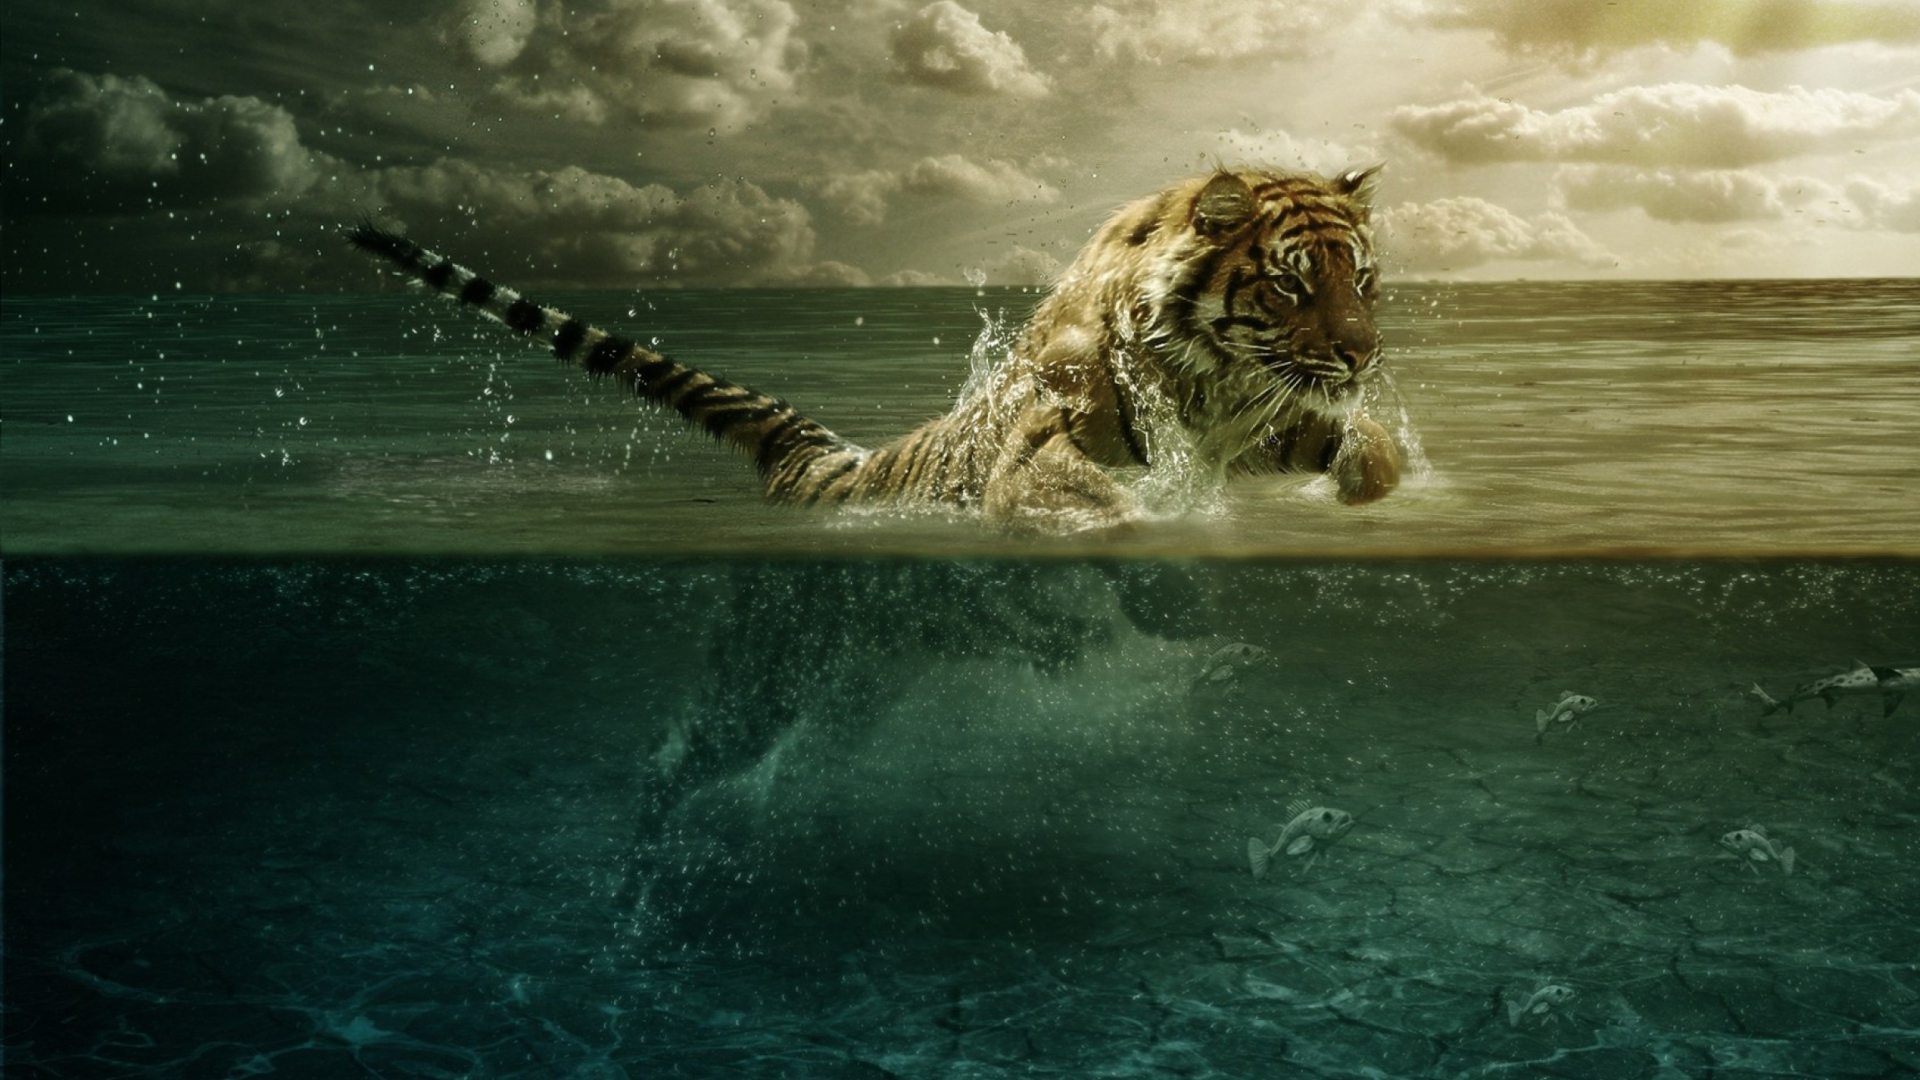 Tiger Jumping In Water wallpaper 1920x1080